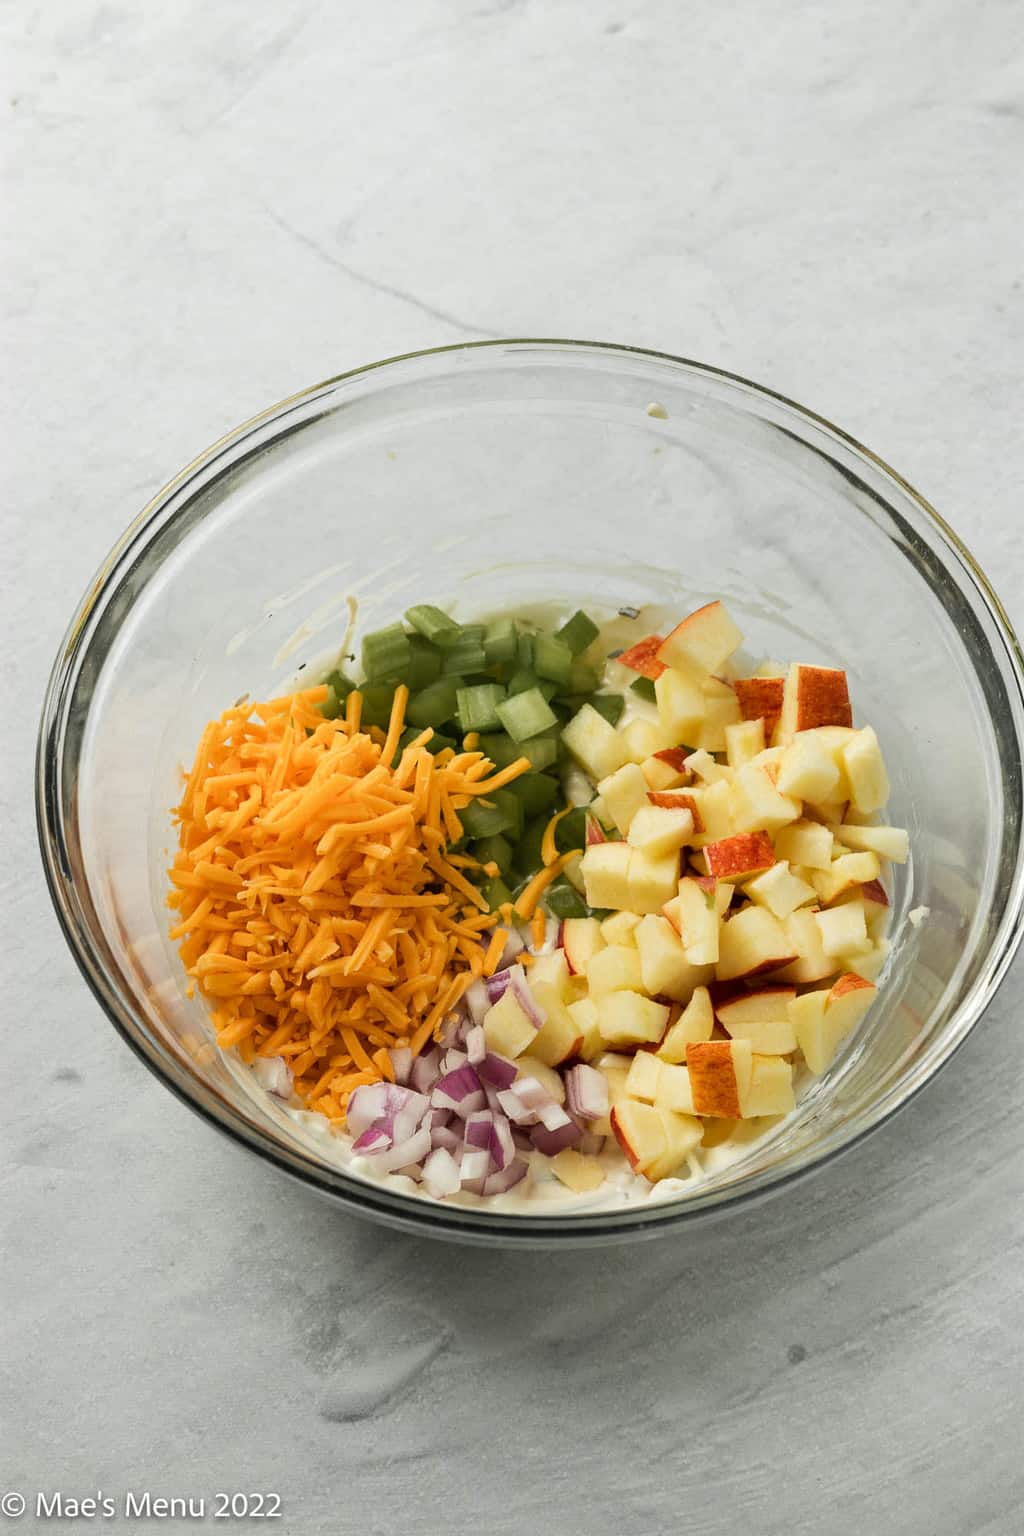 An overhead shot of a glass mixing bowl with celery, red onions, and apples, ceddar cheese.